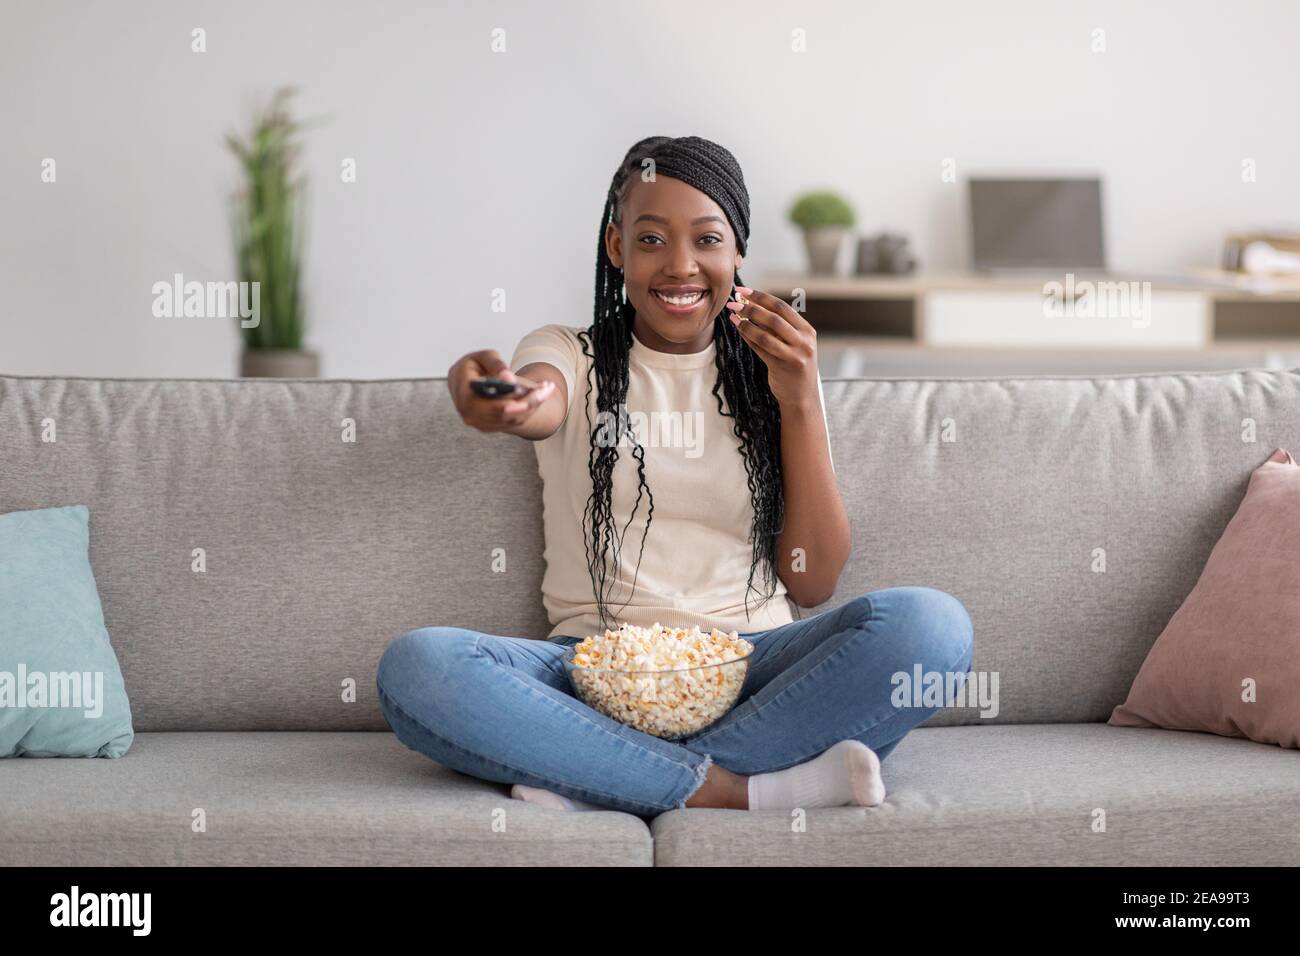 Happy black woman sitting on couch with TV remote Stock Photo